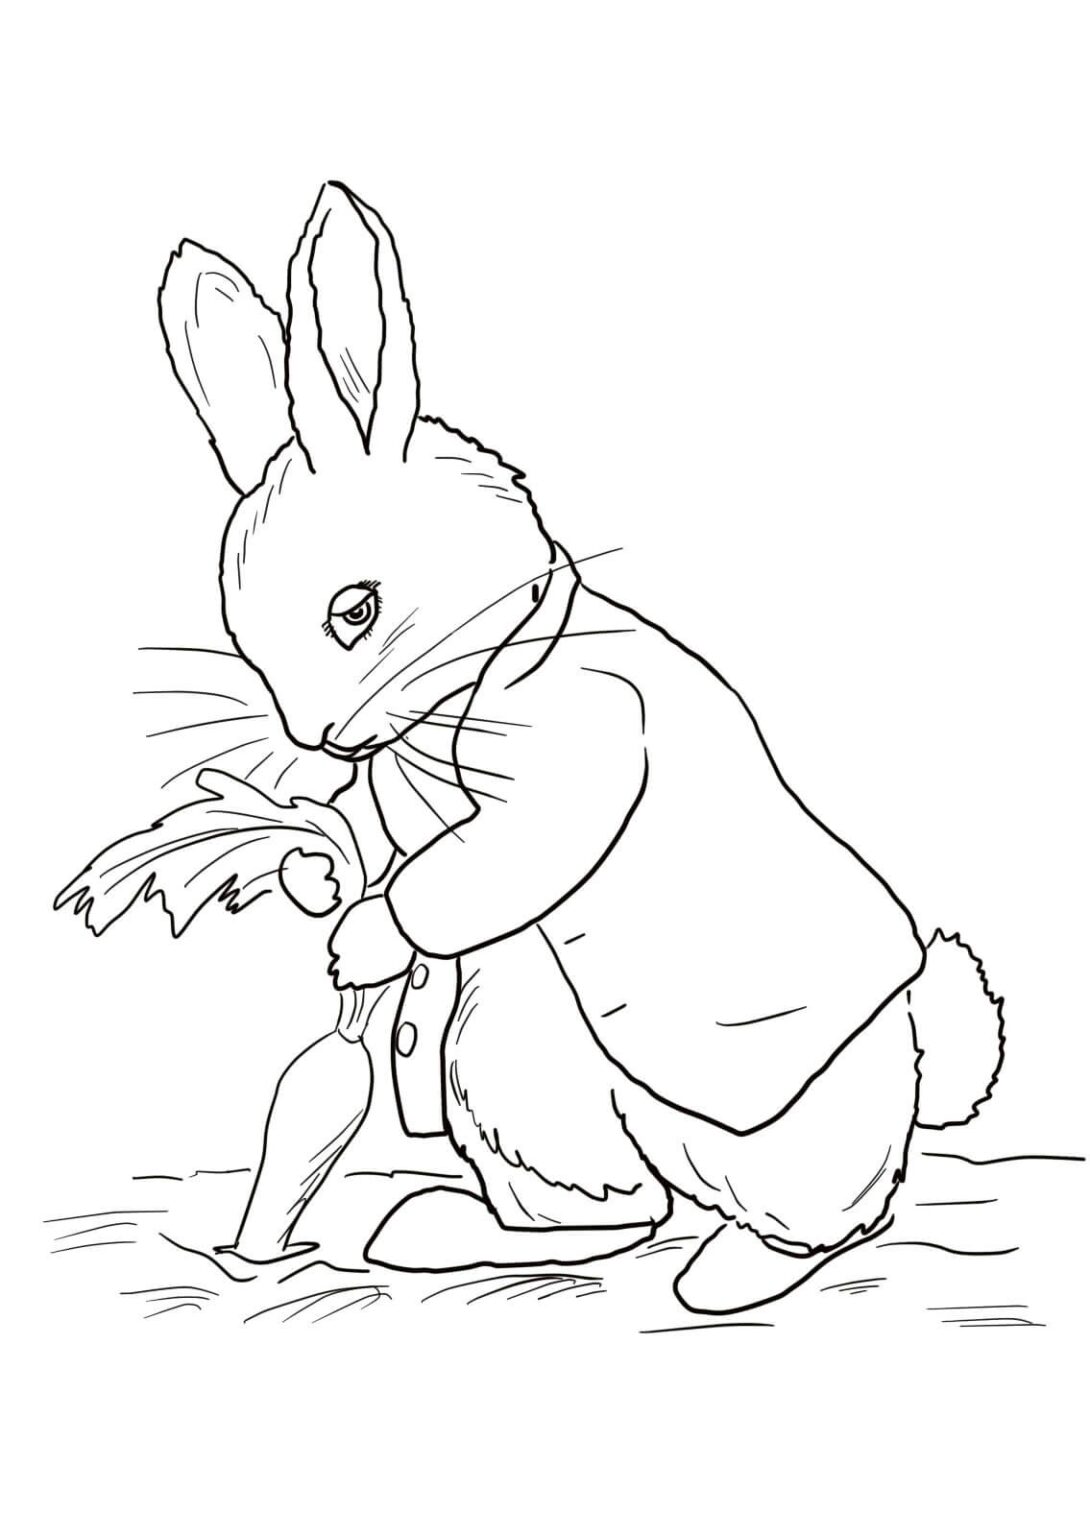 peter rabbit coloring pages for kids